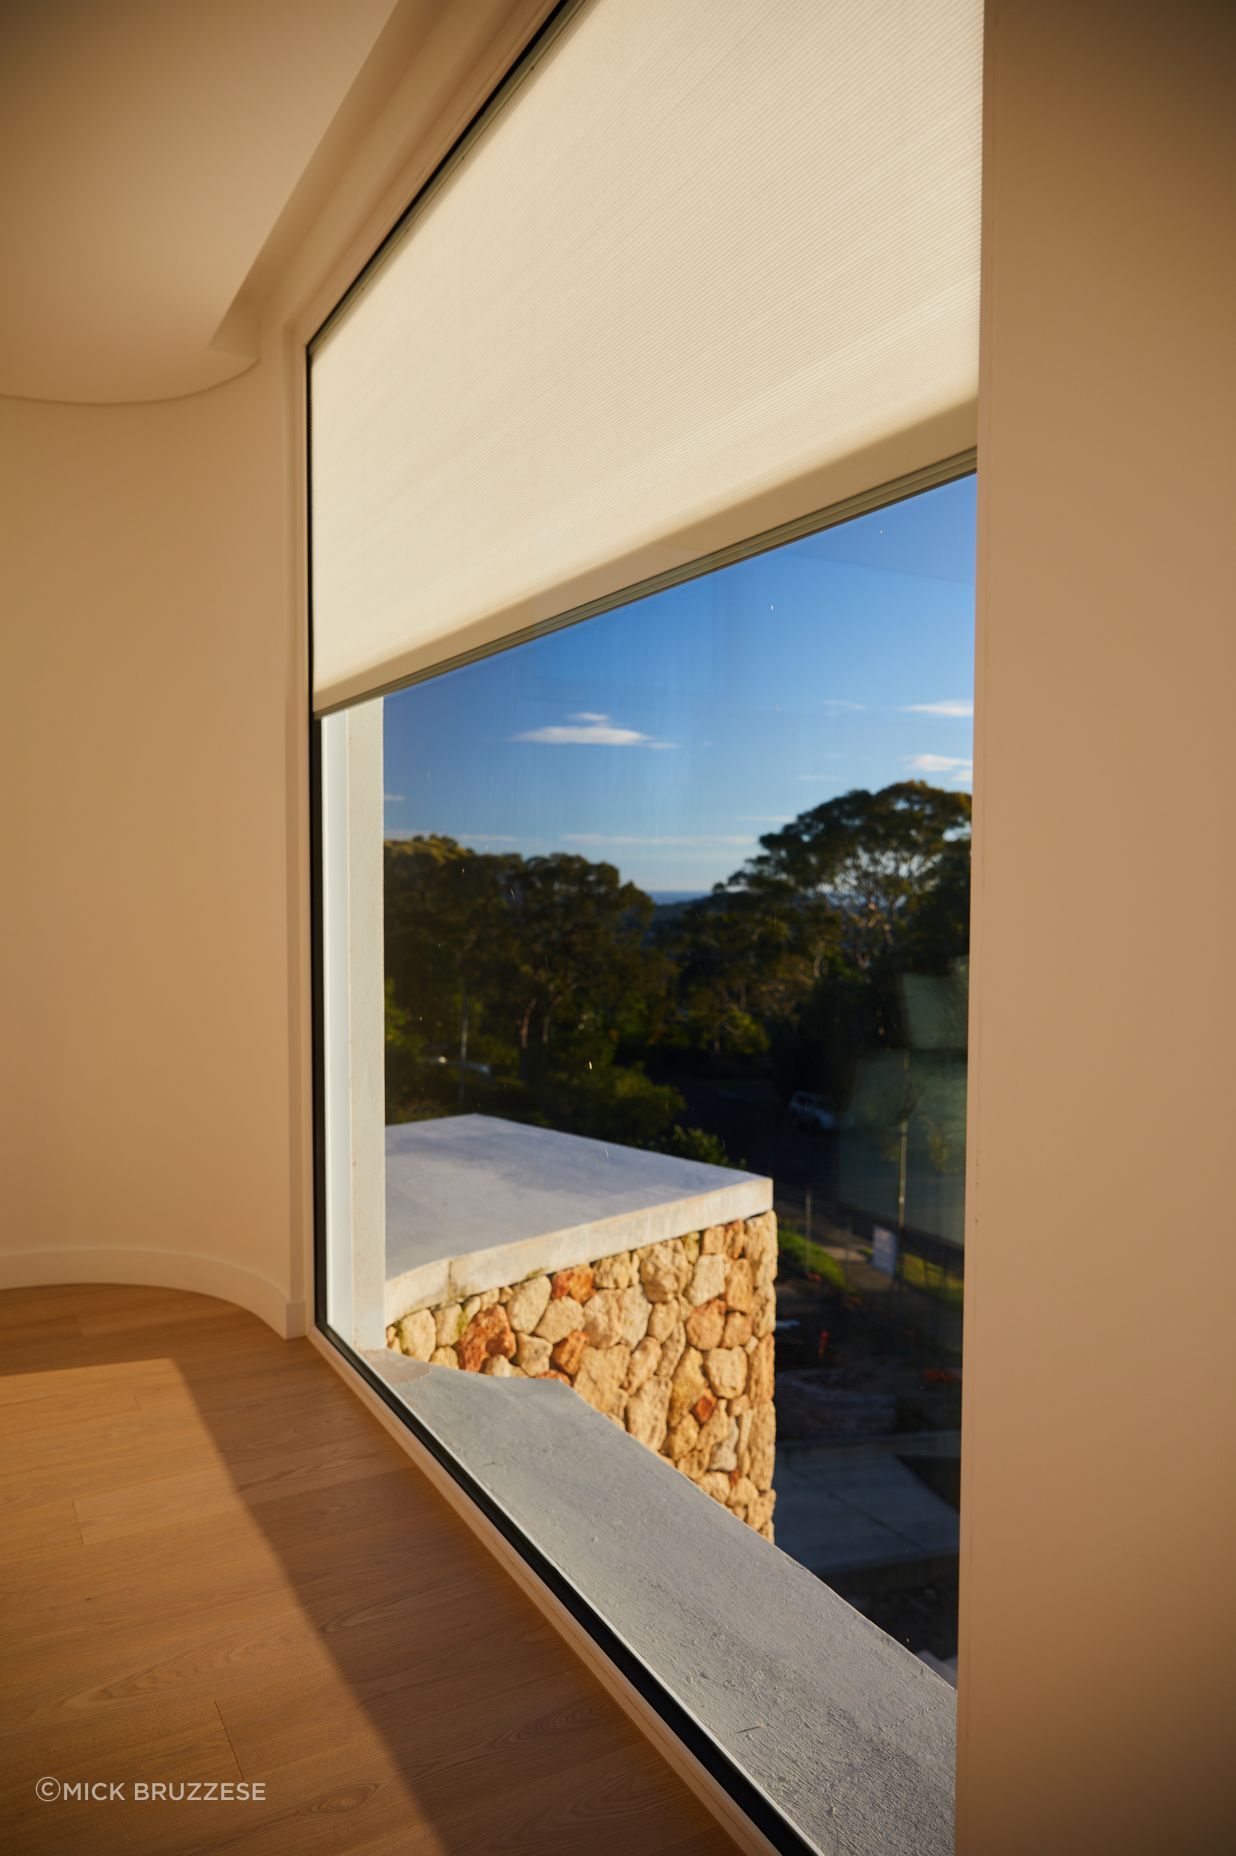 Internal automatic blind systems by IG Blinds